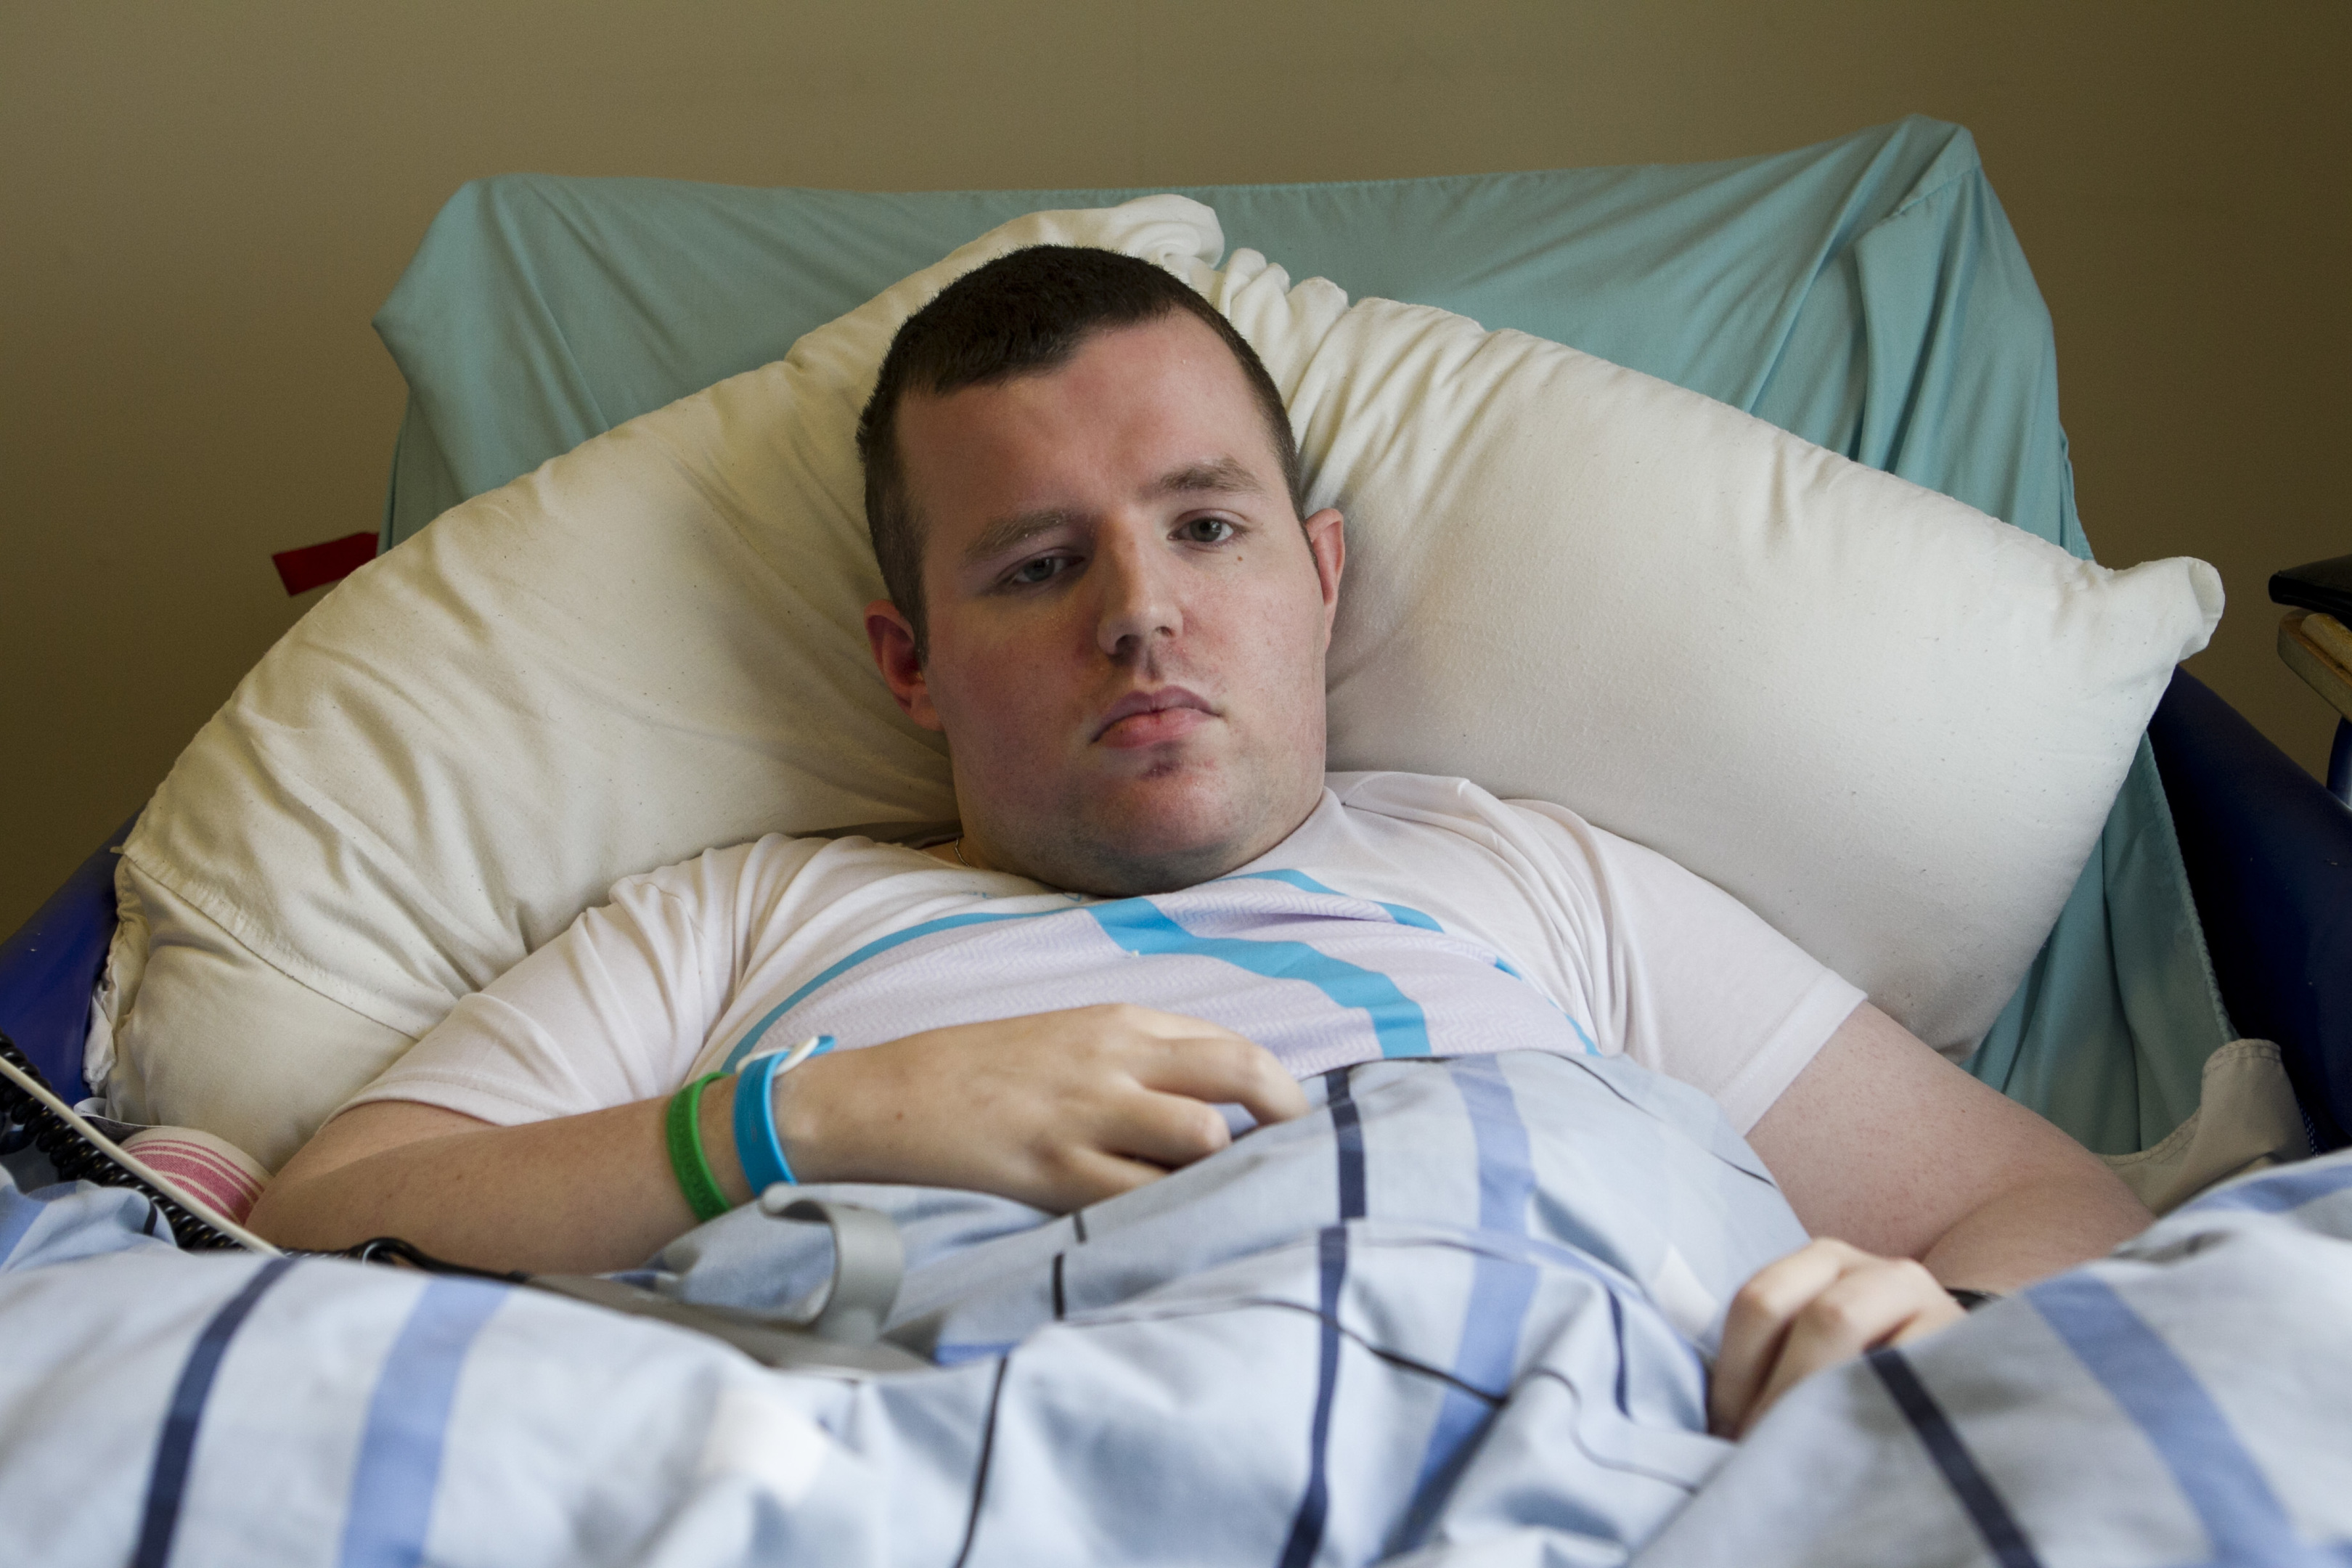 Ryan now struggles to get around and has lost his independence (Andrew Cawley / DC Thomson)